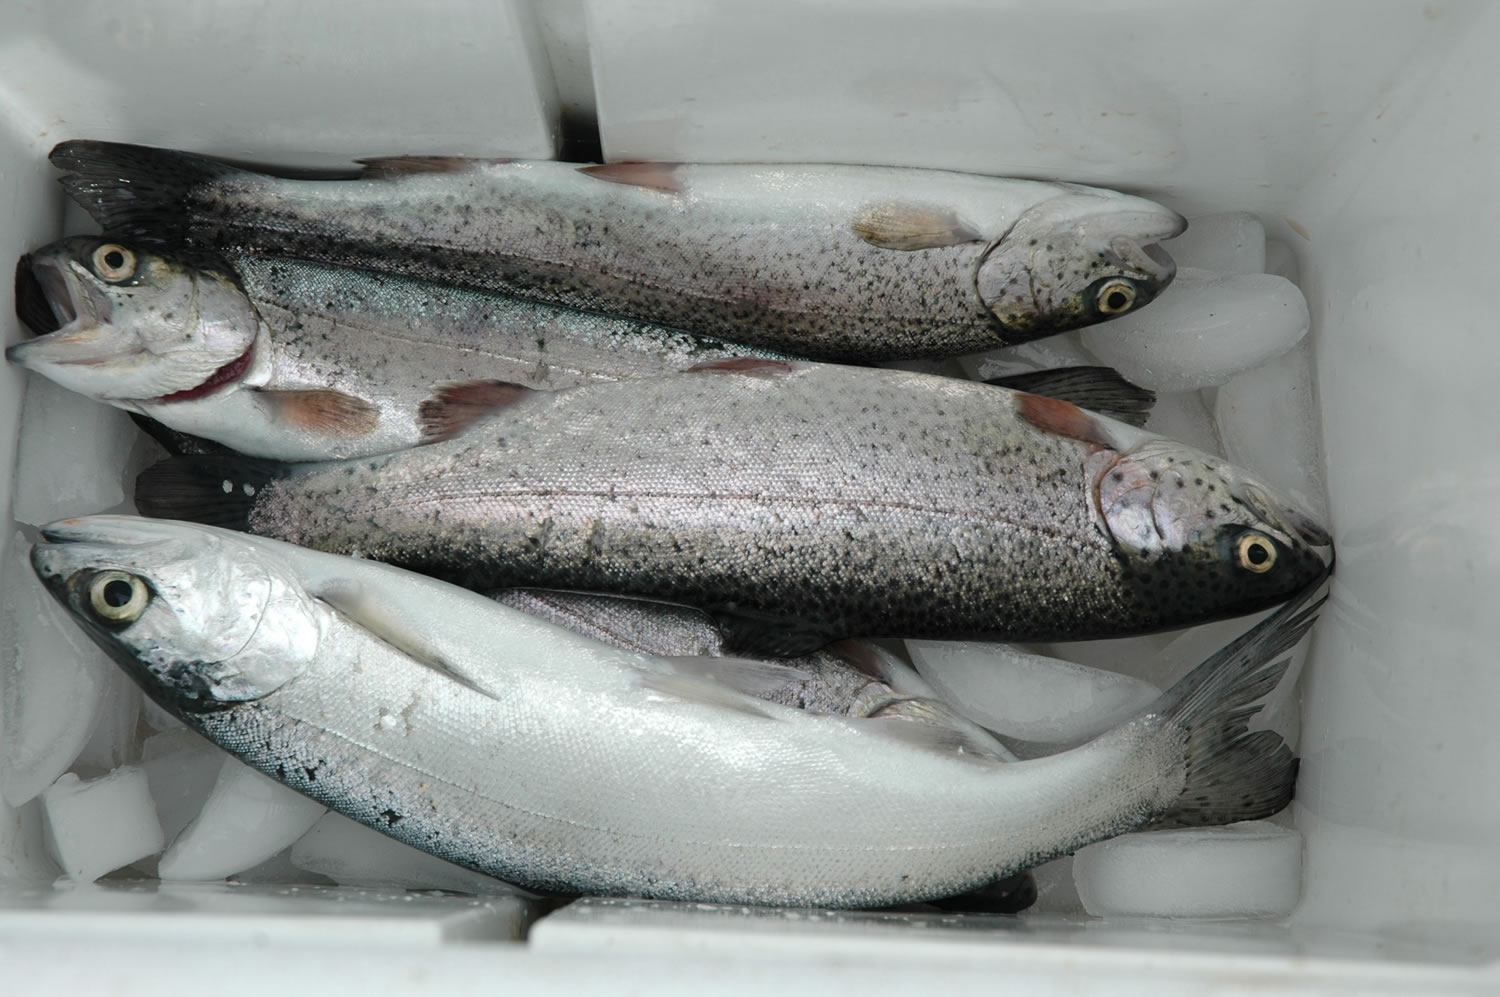 The landlocked coho, at bottom, has a larger eye and a different look than the rainbow trout.